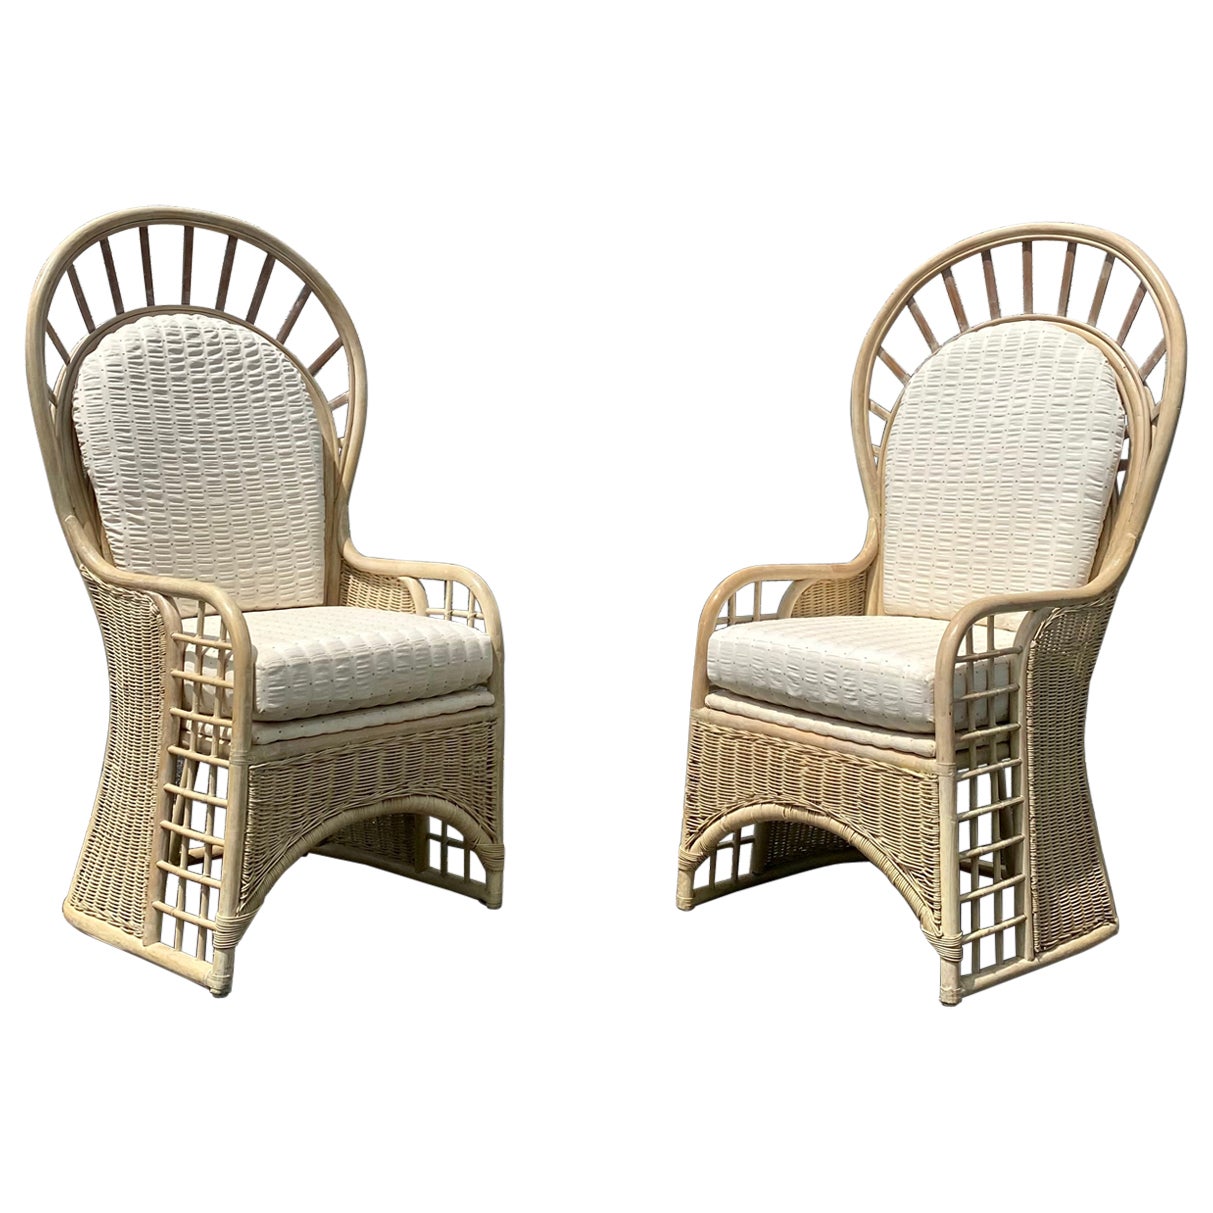 1970s Rattan Sculptural Peacock Chairs, Set of 2